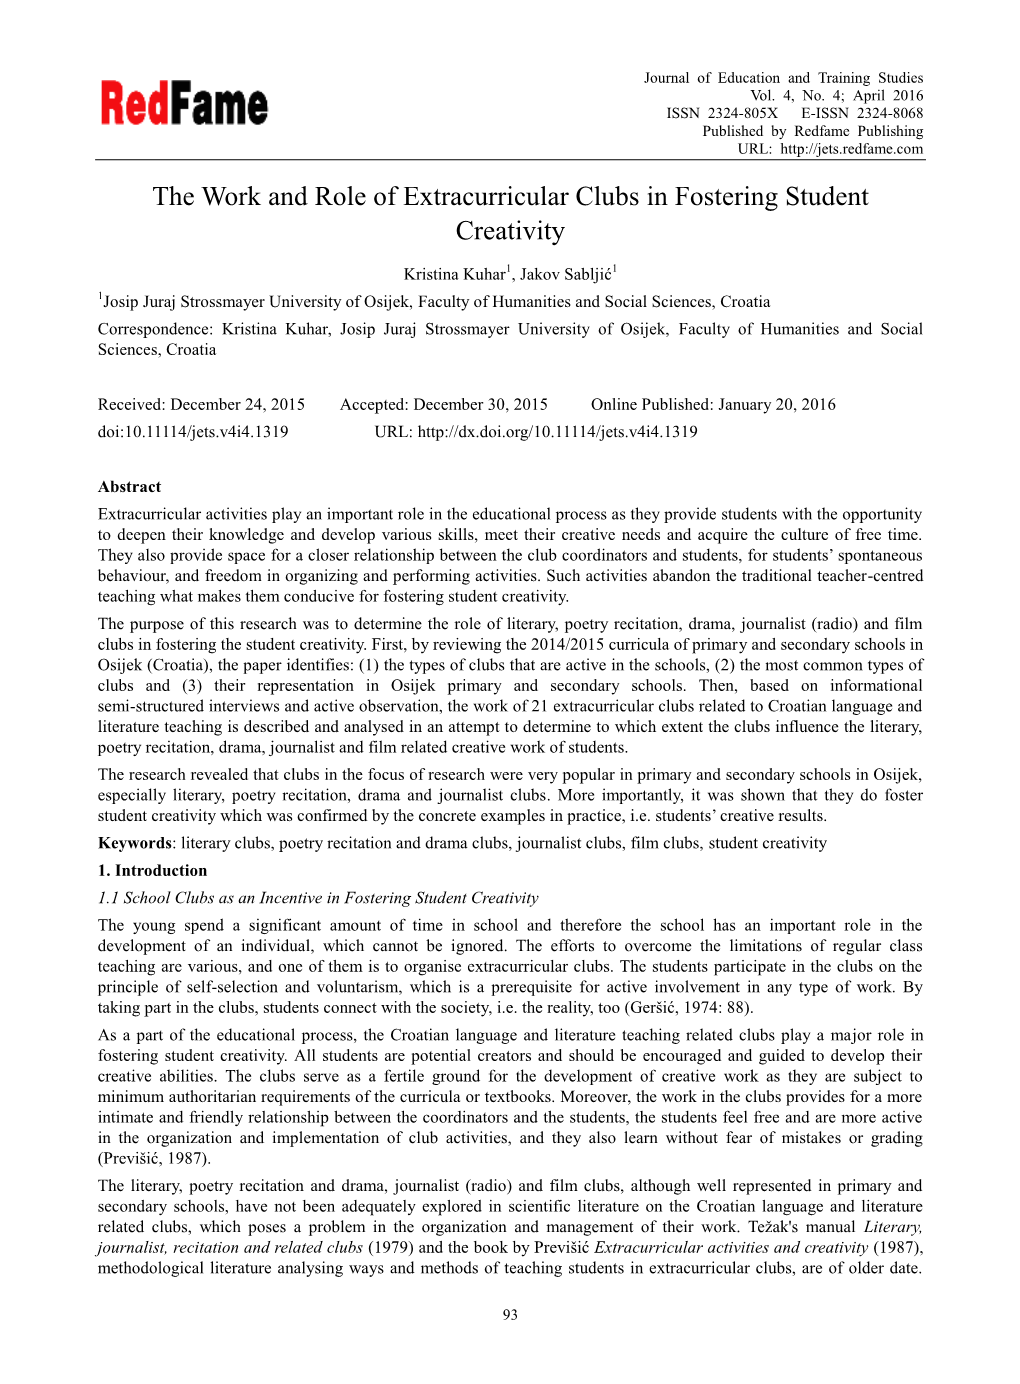 The Work and Role of Extracurricular Clubs in Fostering Student Creativity